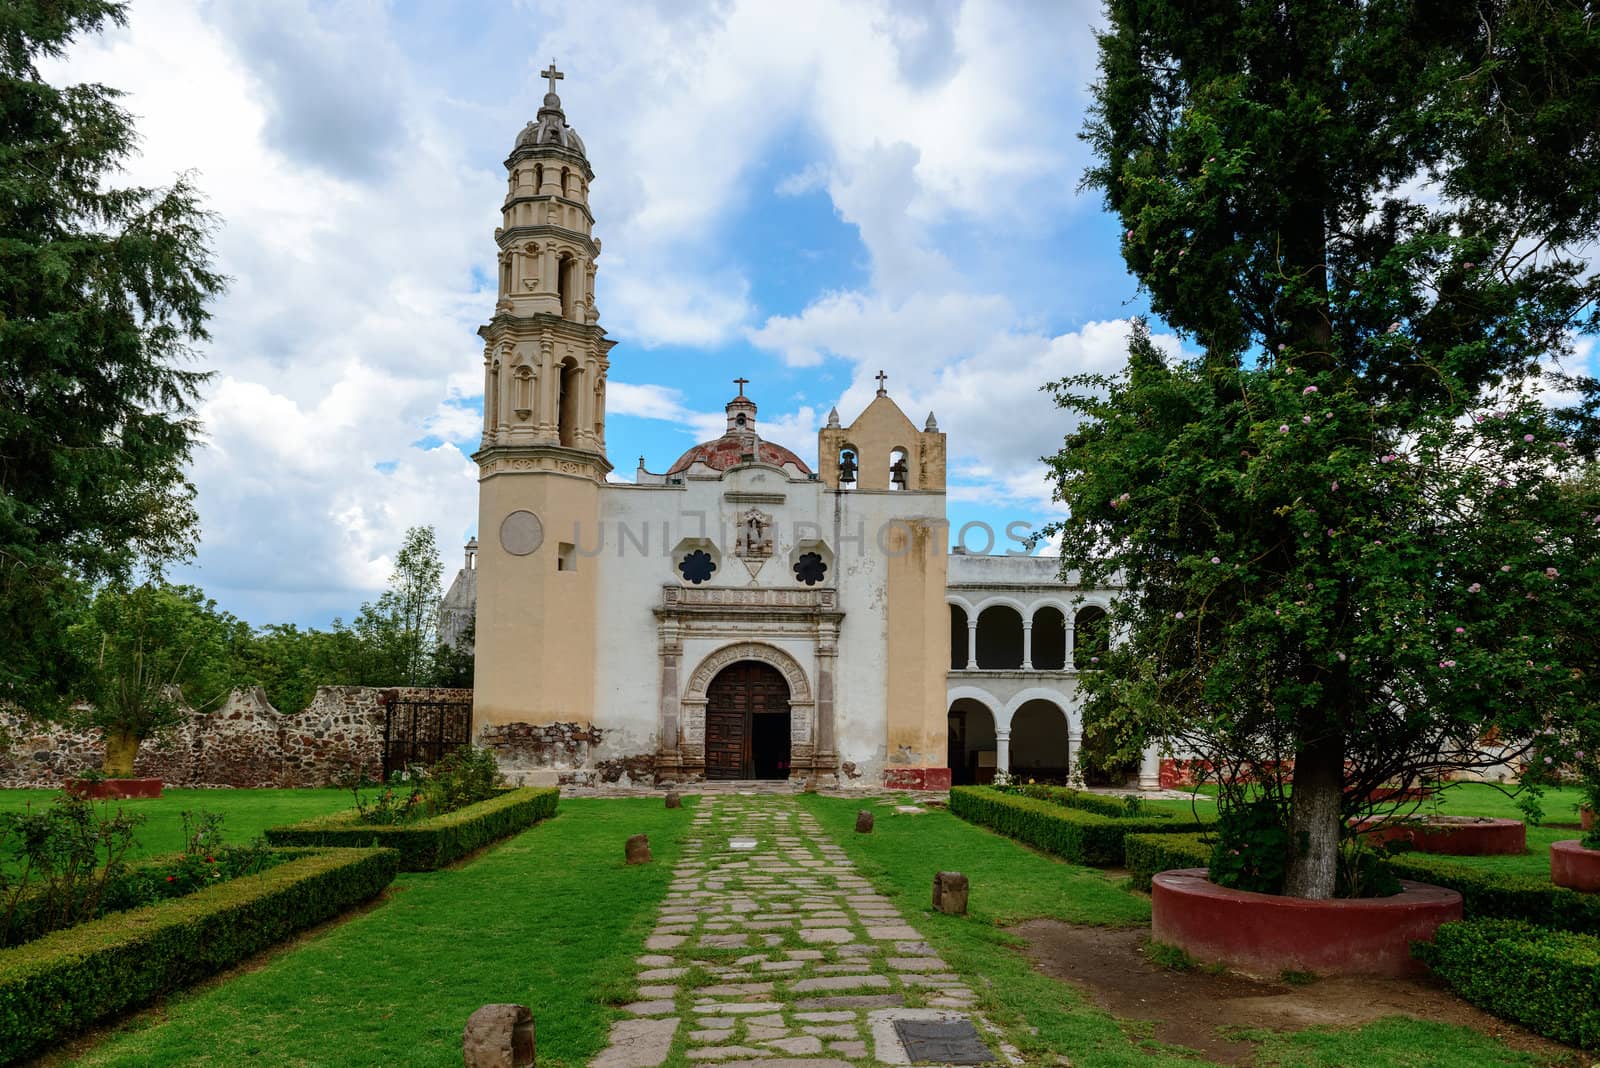 The former Convent of St. John the Evangelist is  icon of the historic architecture of Teotihuacan is located just 3 km from the archaeological site, the site was built during the year 1548 and served as nucleus for the Franciscans. In his church stands a fine old tower and a steeple.  Oxtotipac former convent, an important emblem of the historic architecture of Teotihuacan. It is presented as a perfect example of colonial religious architecture of the sixteenth century and is one of the most visited by tourists architecture lovers.